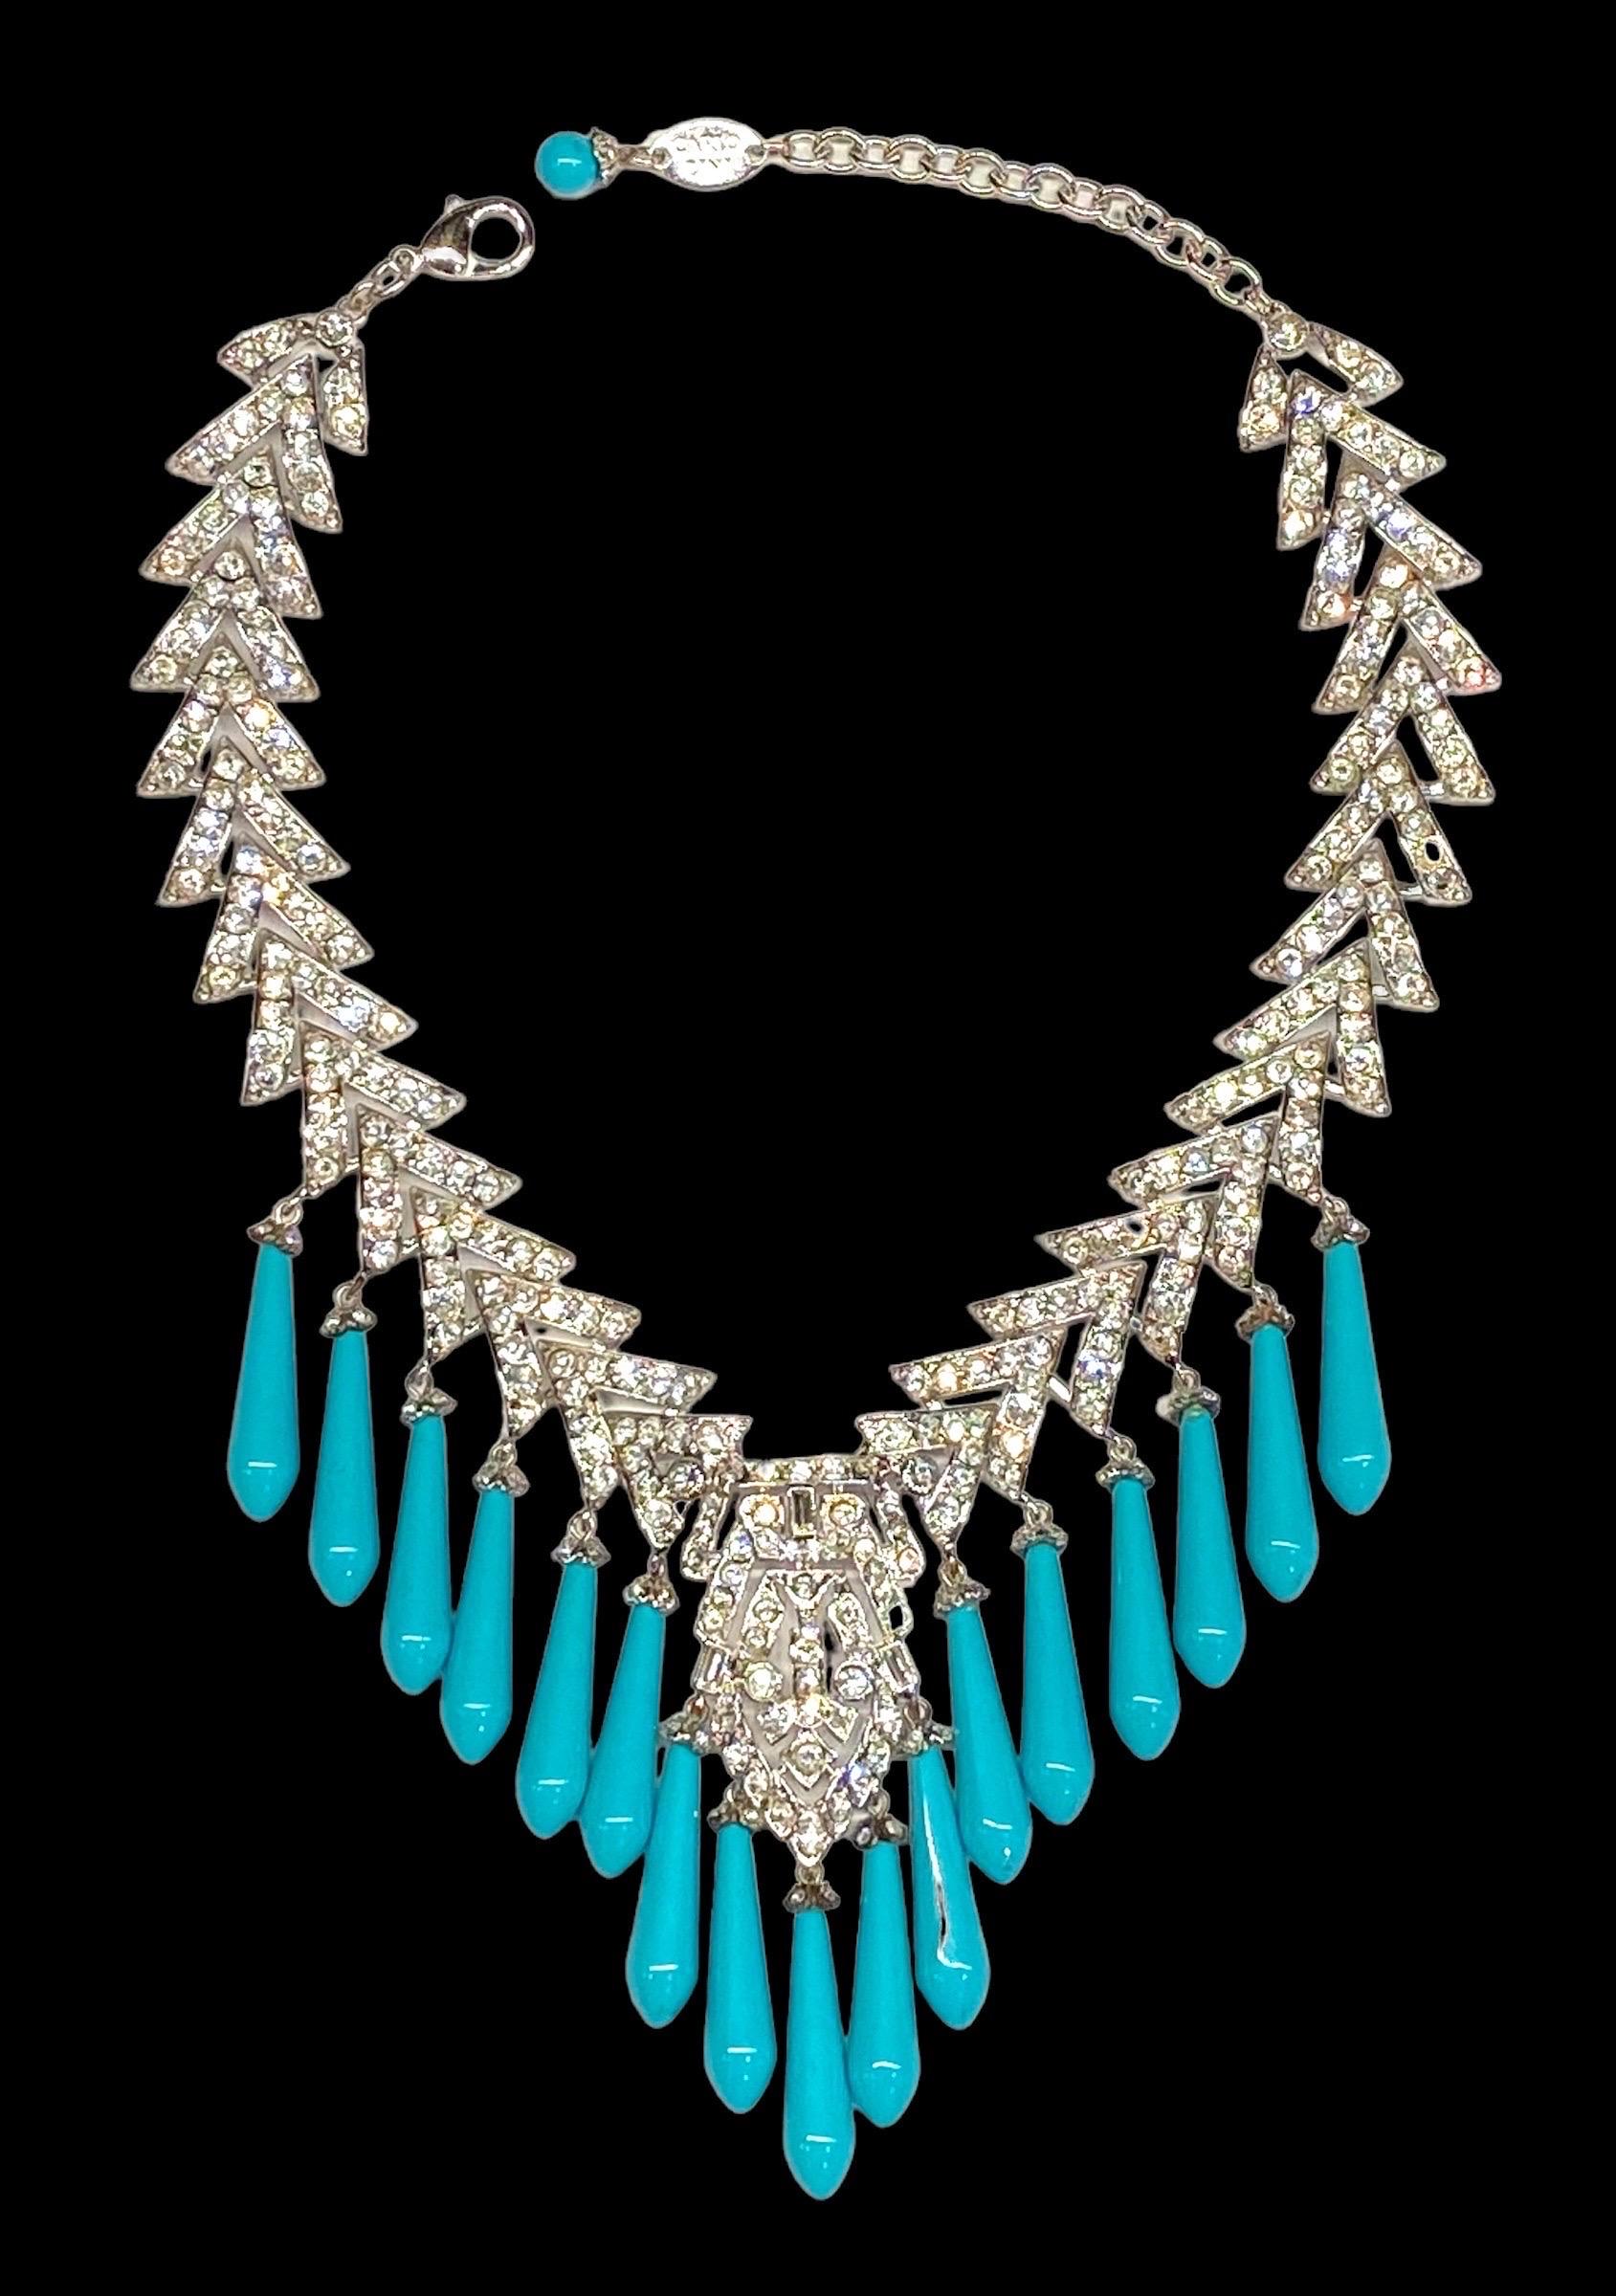 Presented is a show stopping creation by the great Italian bijoux jewelry designer Carlo Zini. The rhodium plate Art Deco style rhinestone and glass turquoise drop necklace is a true work of art. The combination of sparkling rhinestones encrusted V